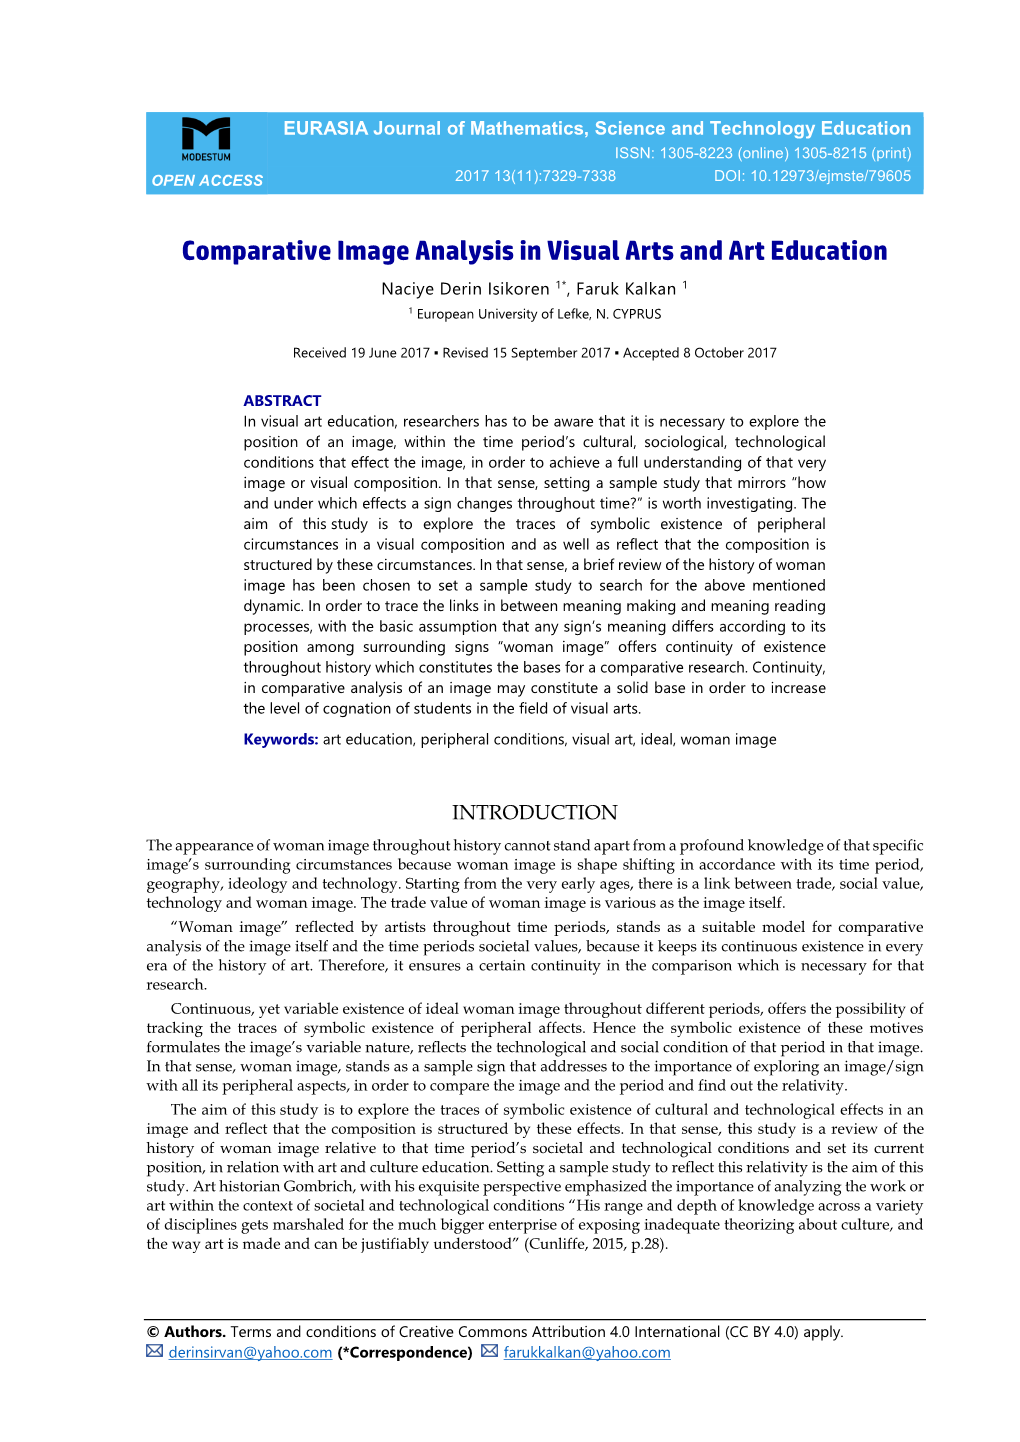 Comparative Image Analysis in Visual Arts and Art Education